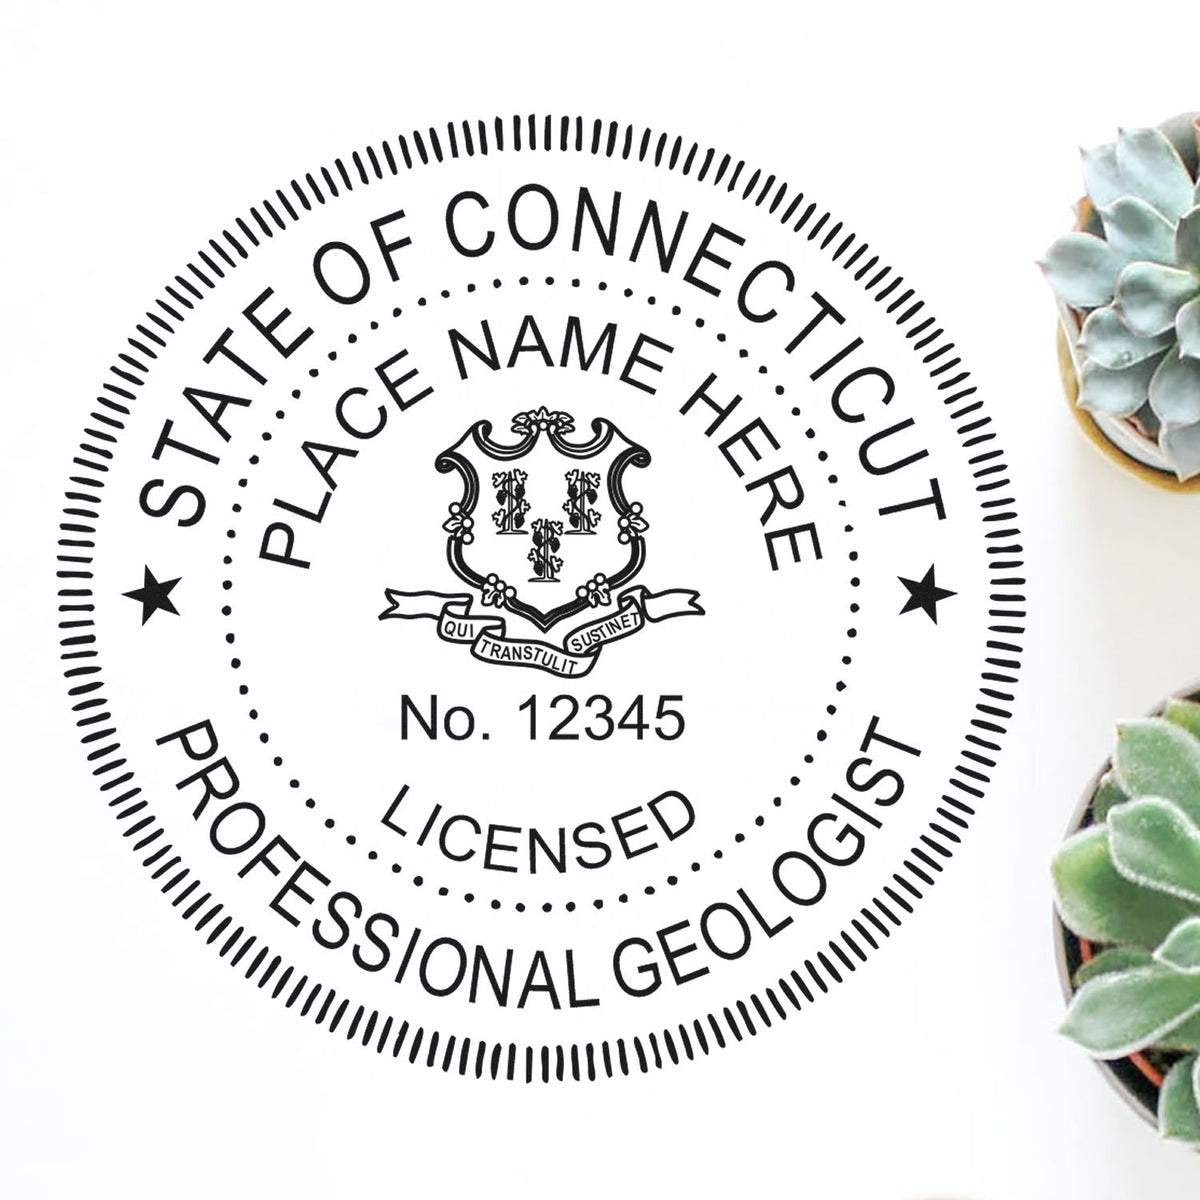 A photograph of the Digital Connecticut Geologist Stamp, Electronic Seal for Connecticut Geologist stamp impression reveals a vivid, professional image of the on paper.